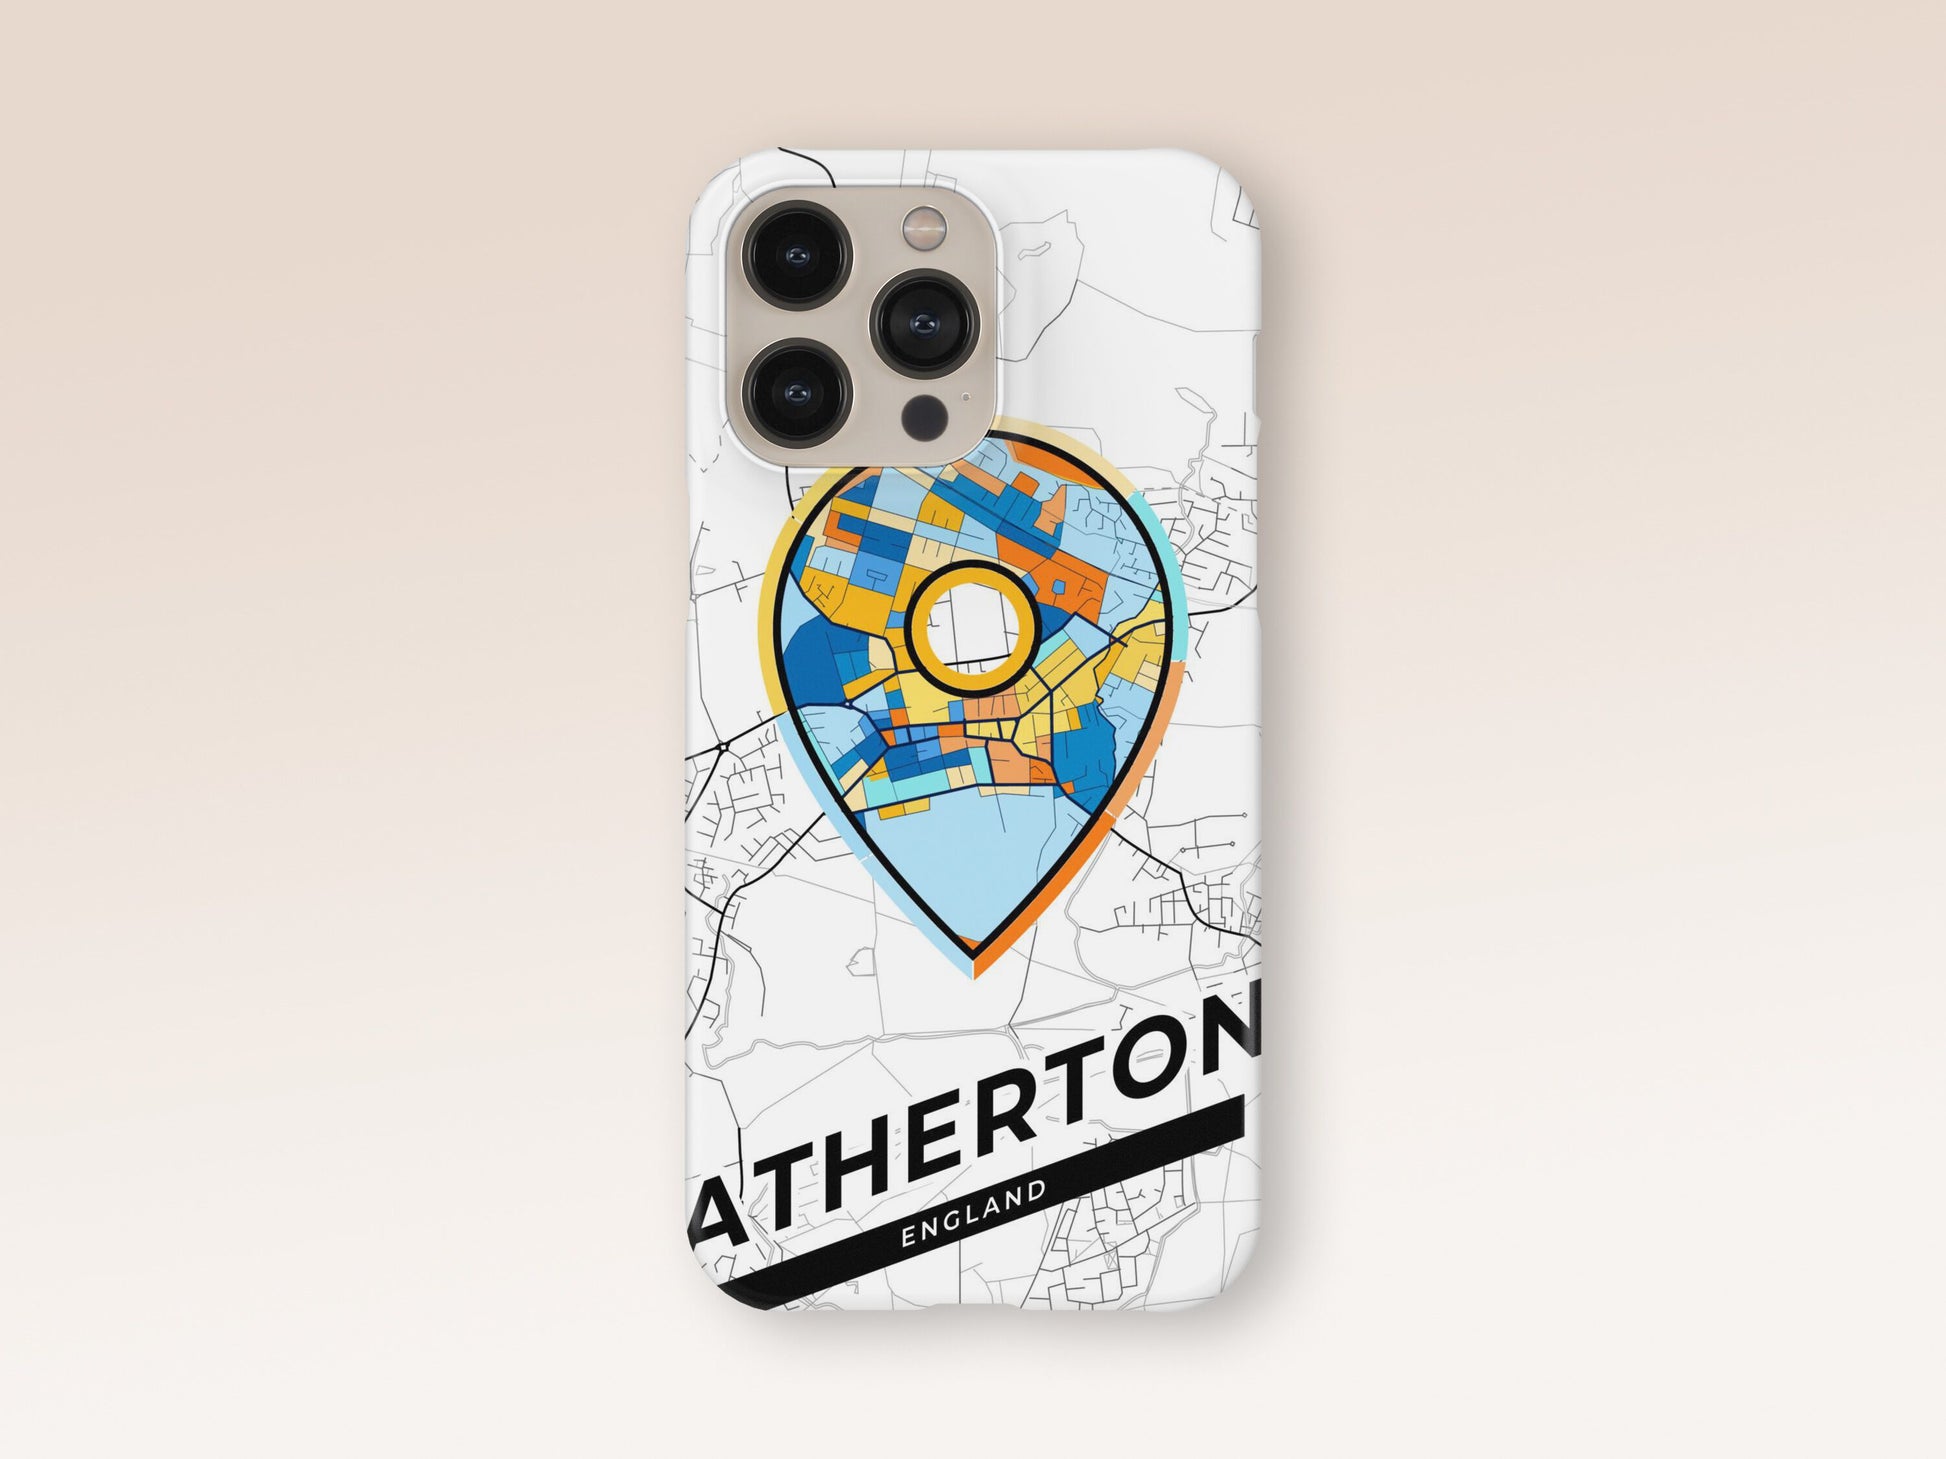 Atherton England slim phone case with colorful icon. Birthday, wedding or housewarming gift. Couple match cases. 1